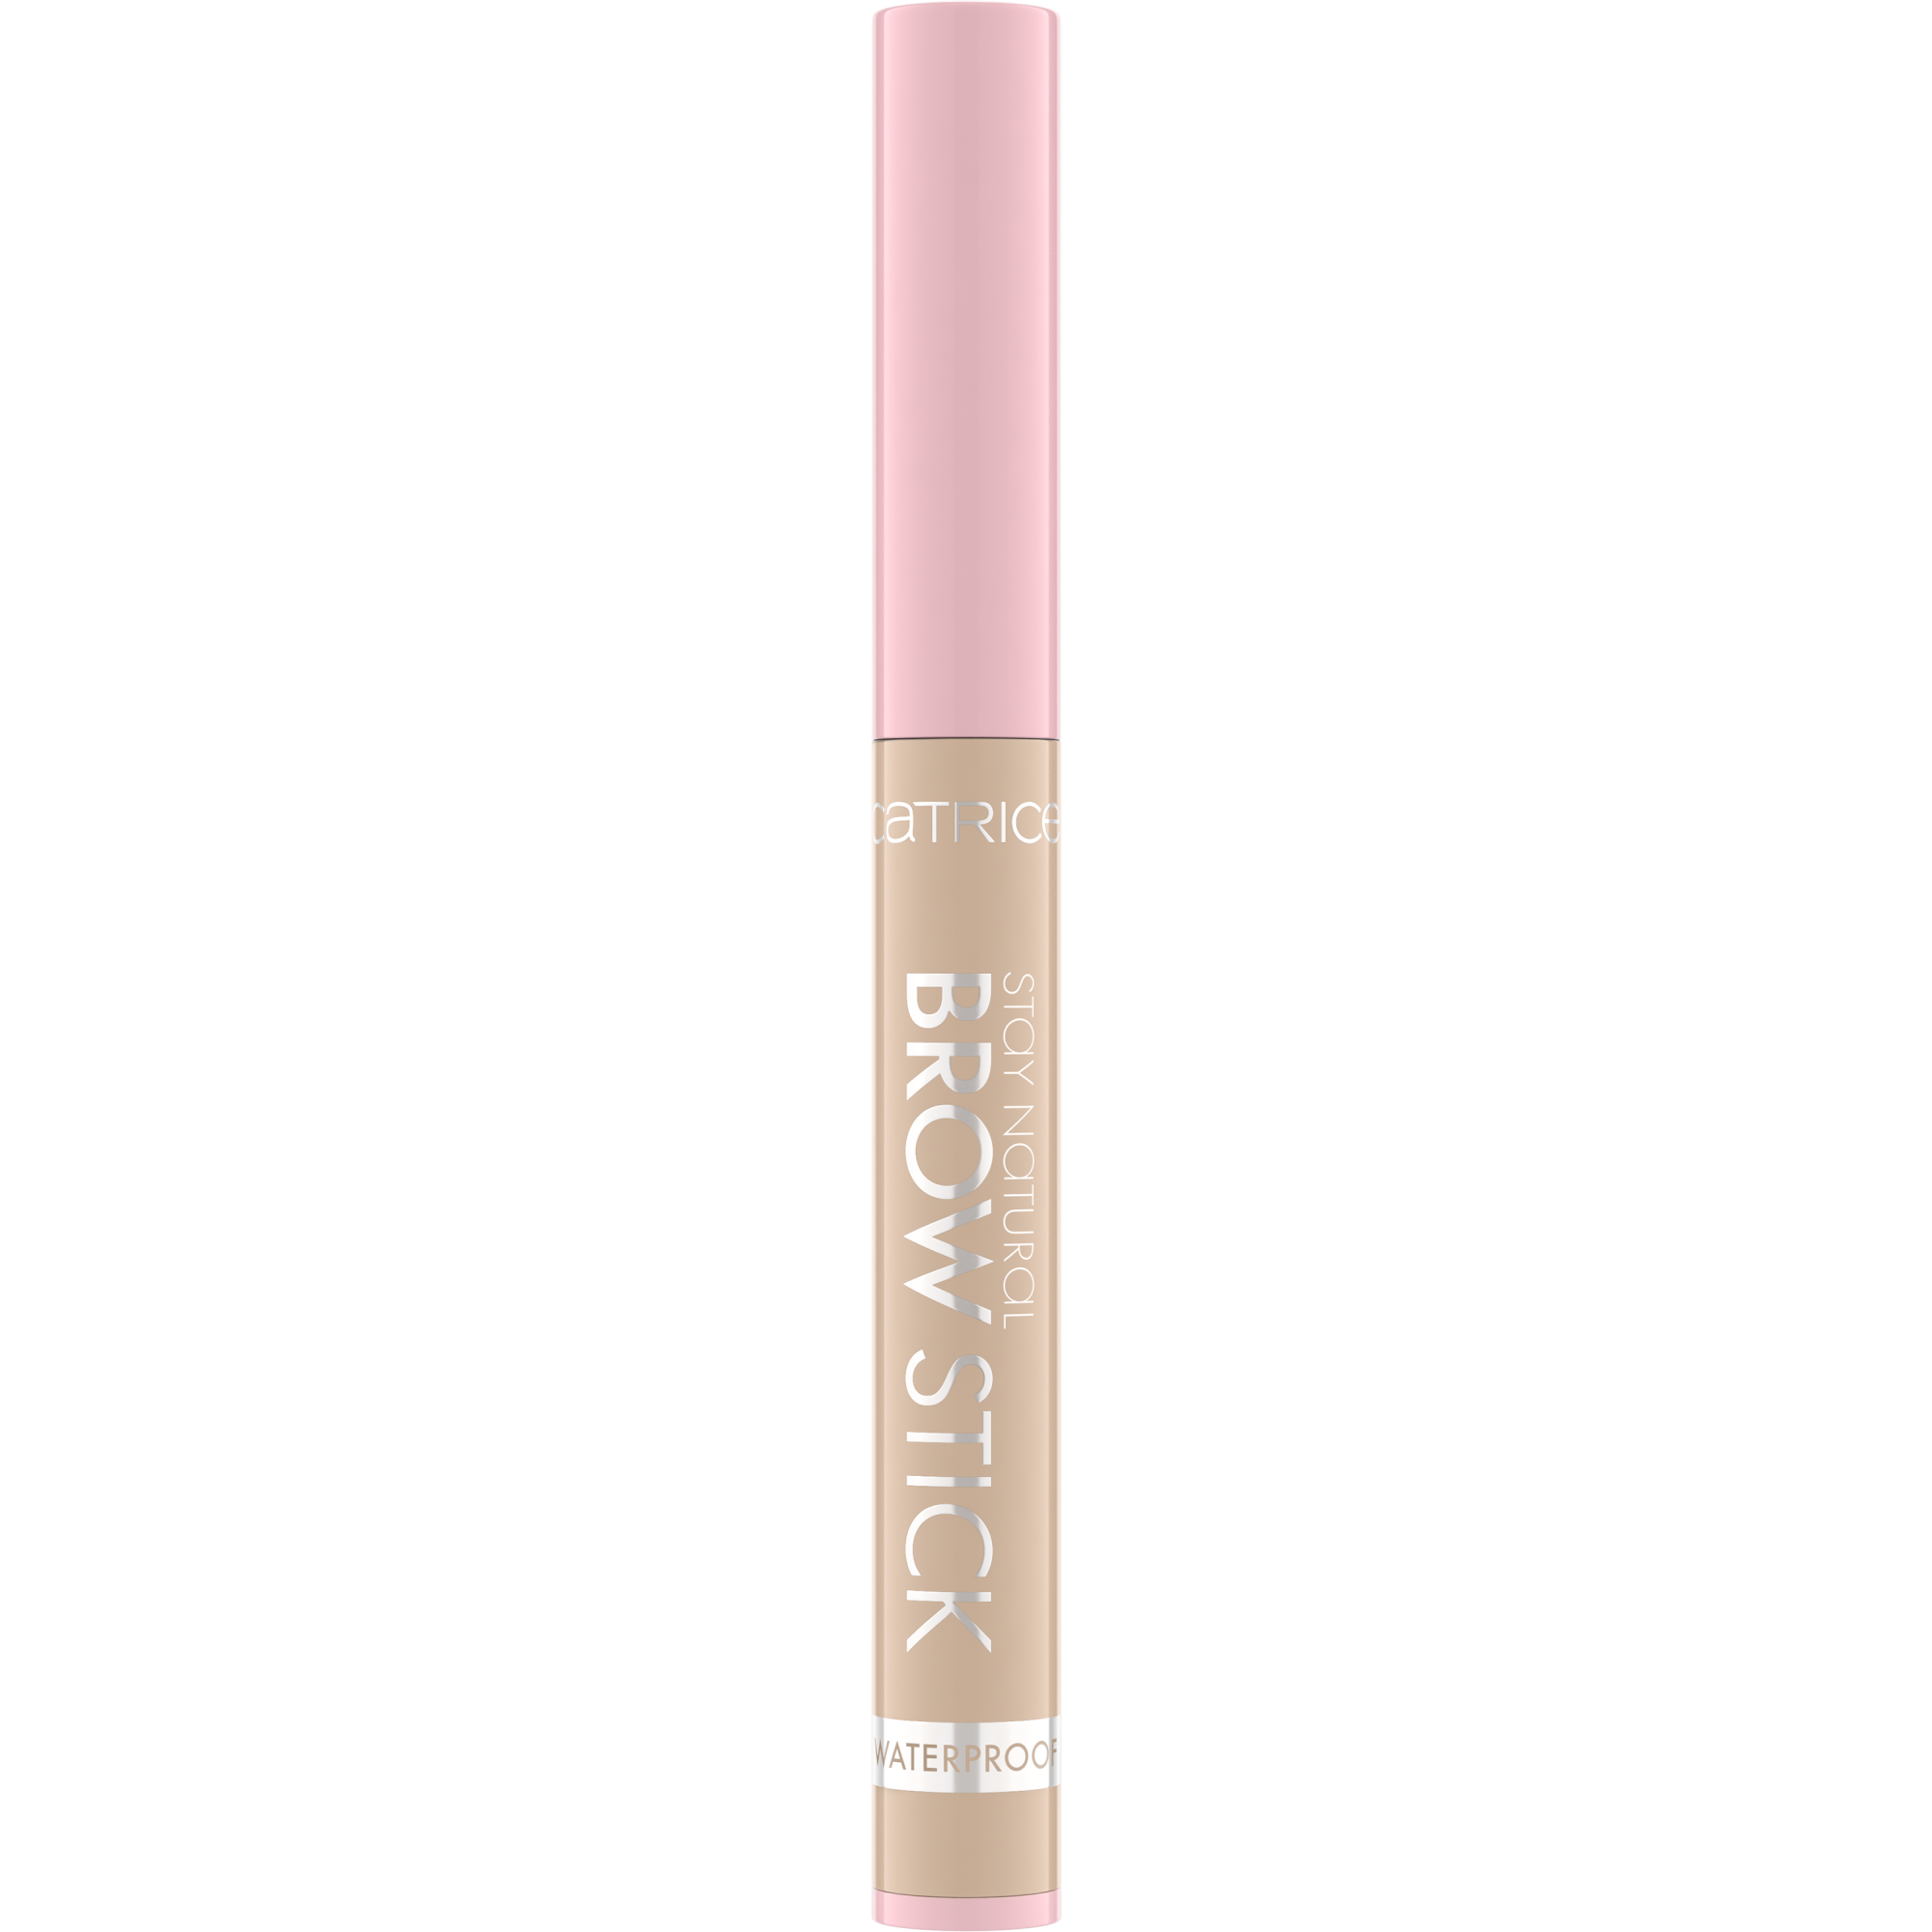 Stay Natural Brow Stick